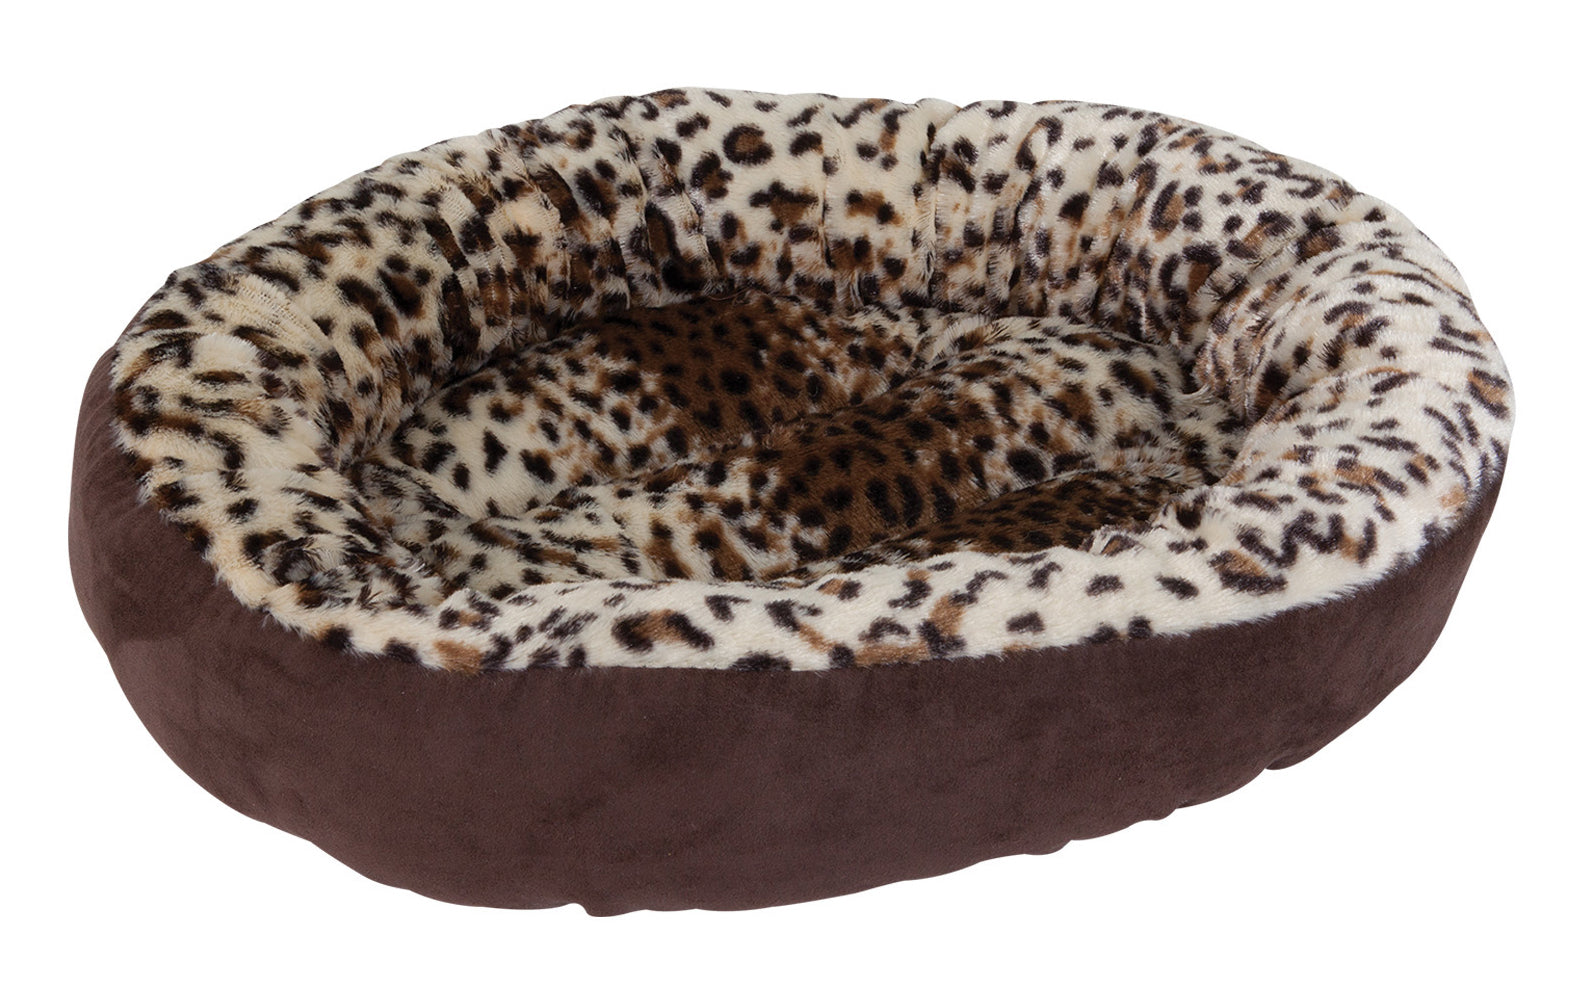 DOSKOCIL MANUFACTURING CO INC, Petmate Aspen Pet Brown Faux Micro Suede Animal Print Pet Bed 5 in. H X 18 in. W X 18 in. L